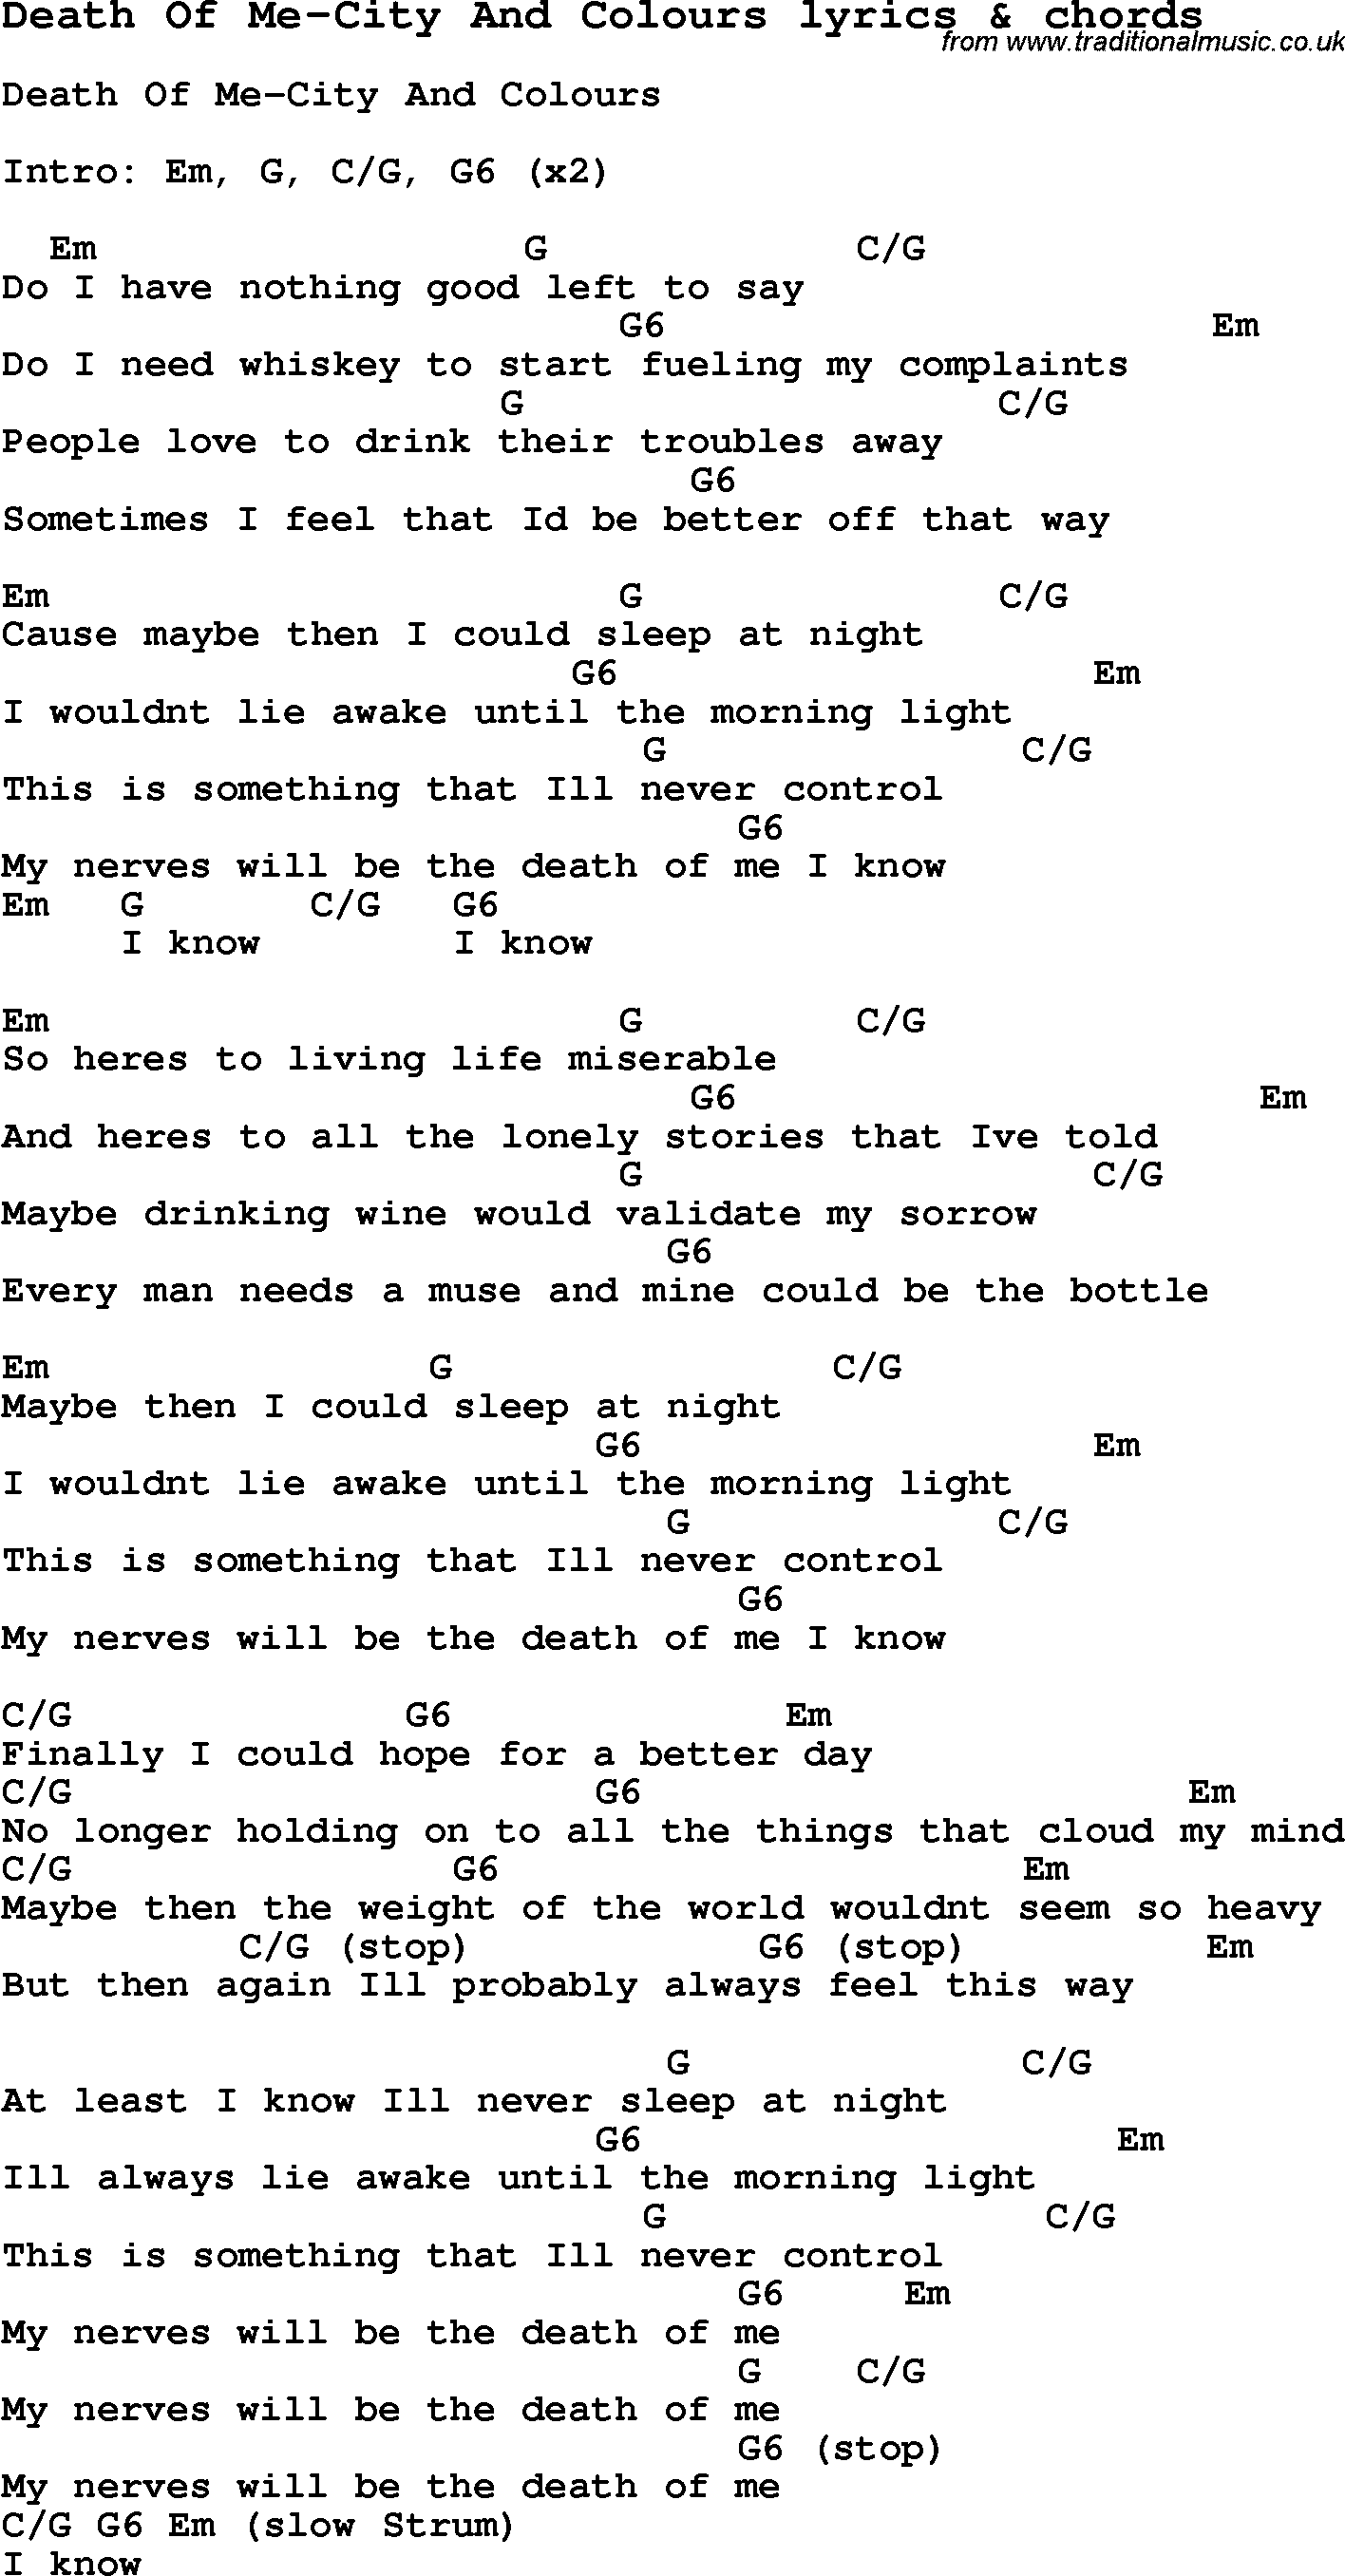 Love Song Lyrics for: Death Of Me-City And Colours with chords for Ukulele, Guitar Banjo etc.